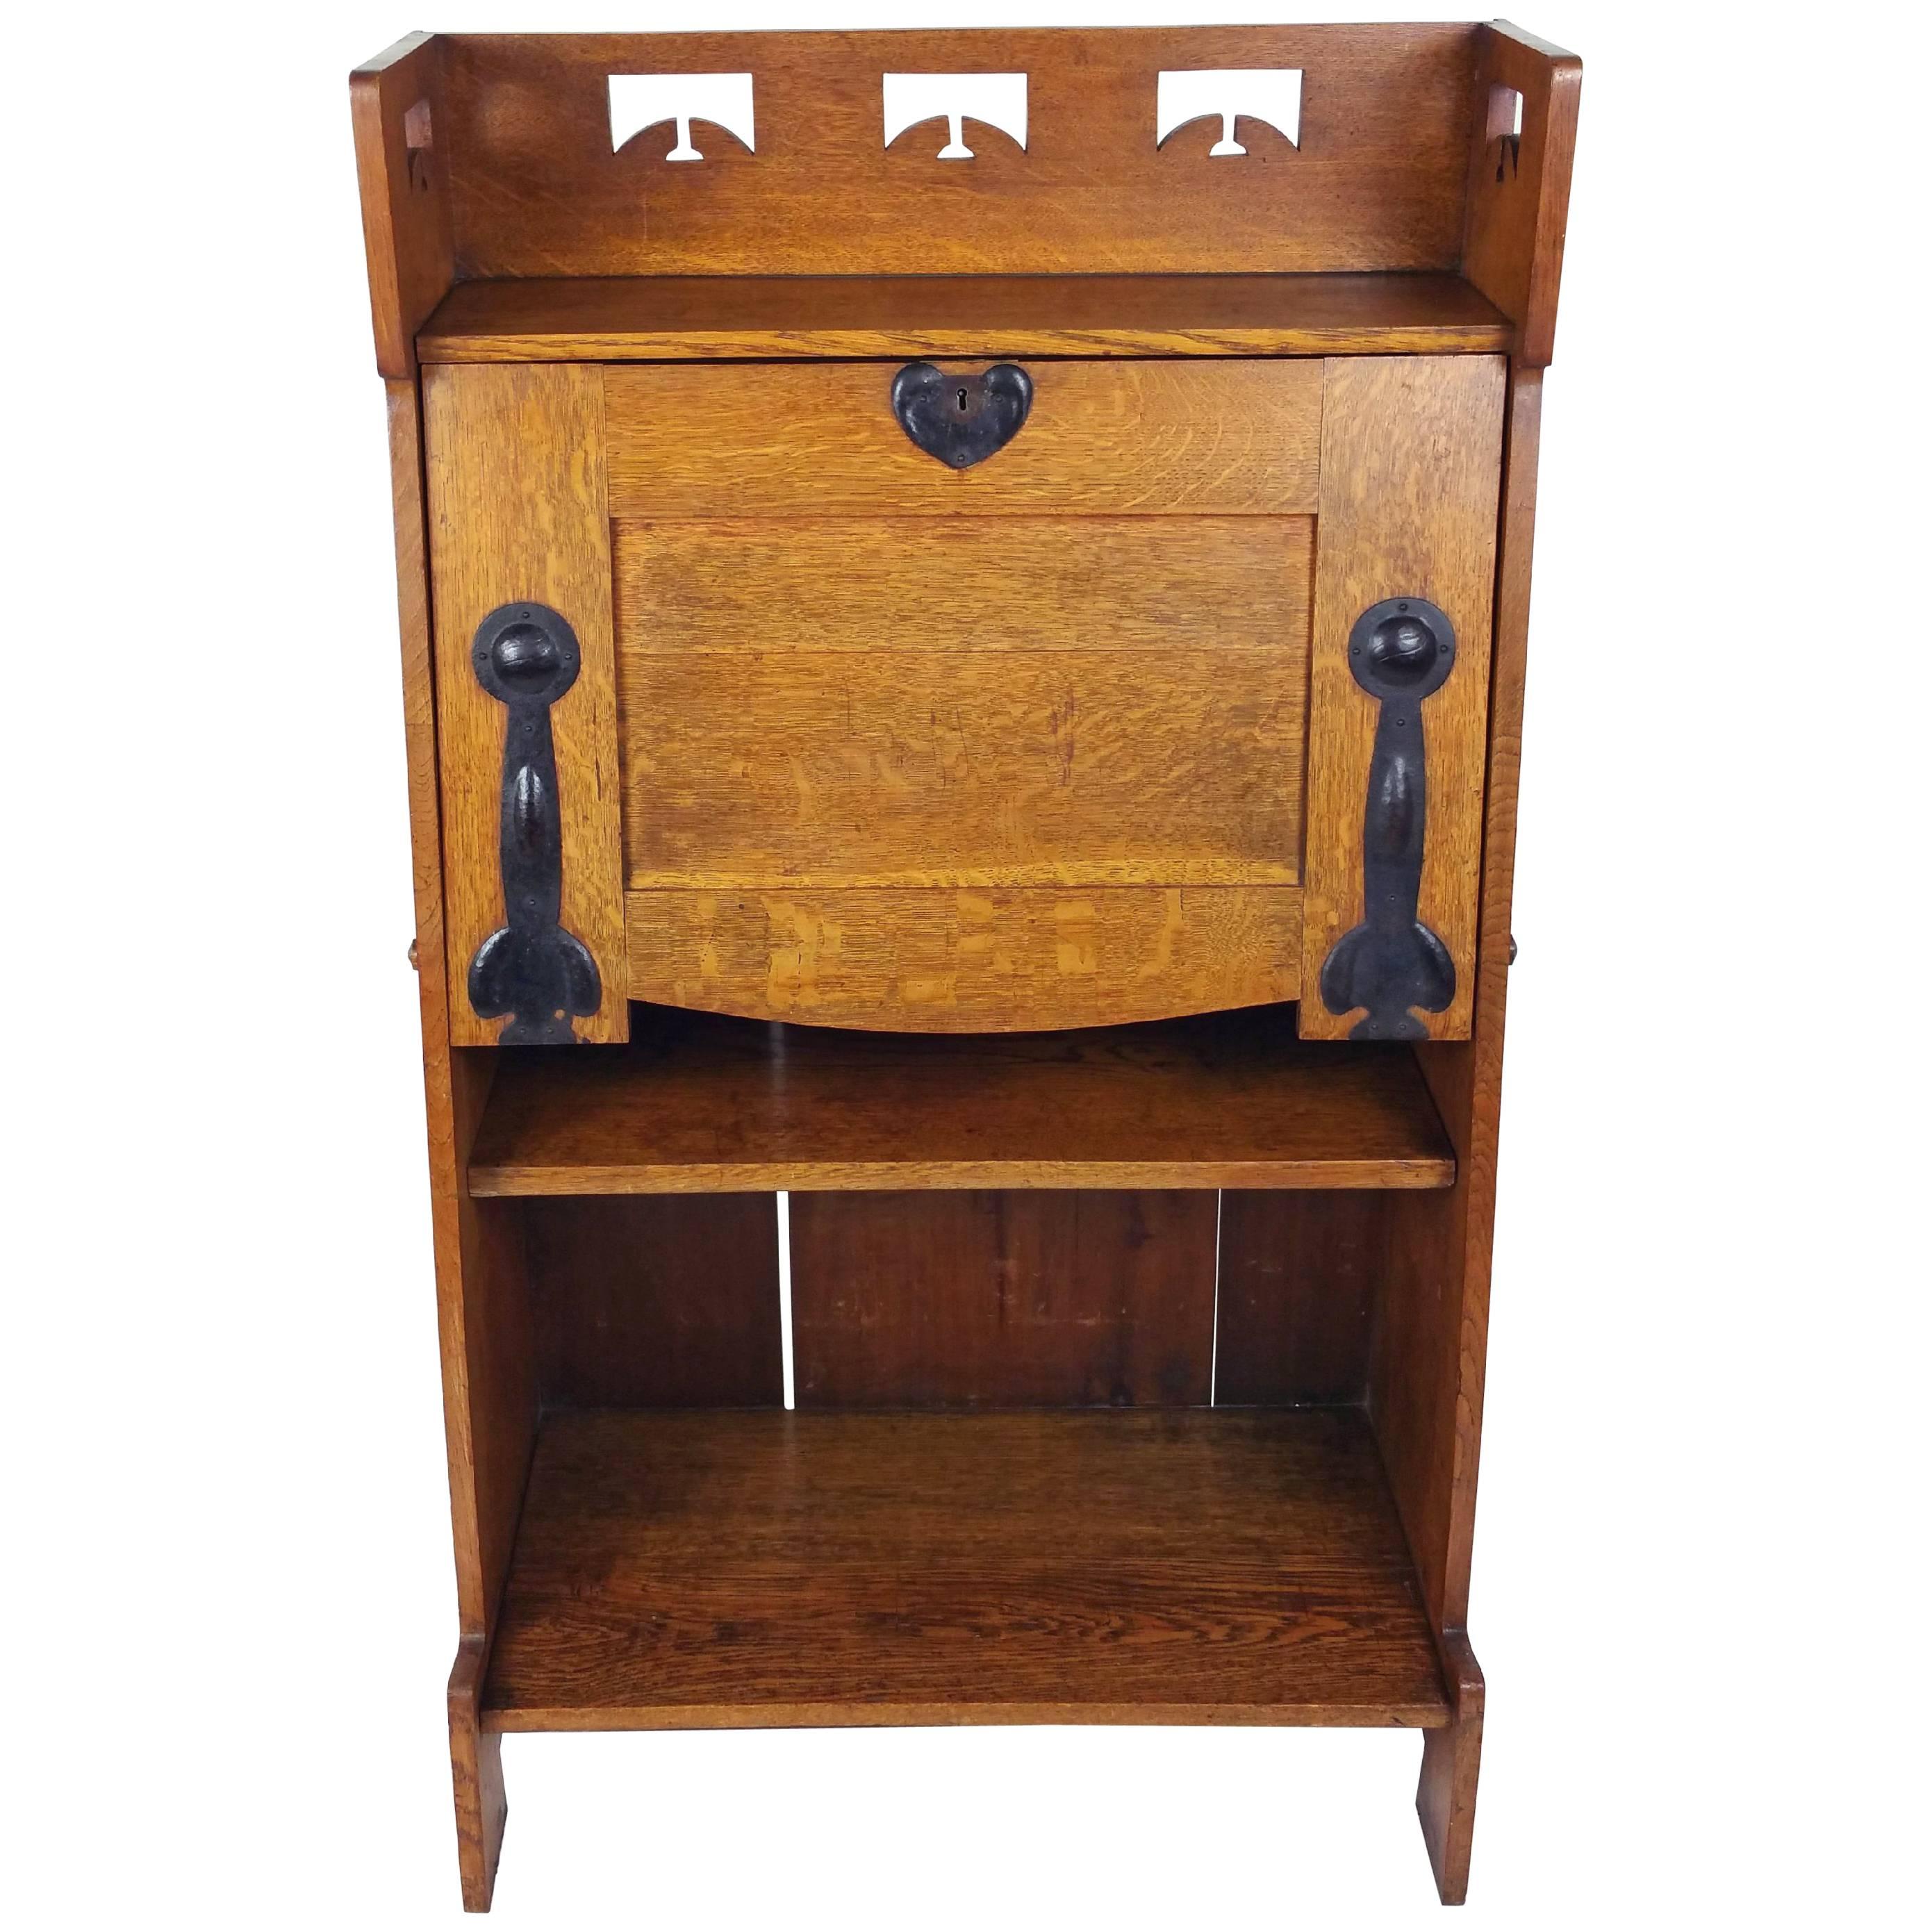 Late 19th Century Arts and Crafts Oak Bureau Attributed to Liberty’s